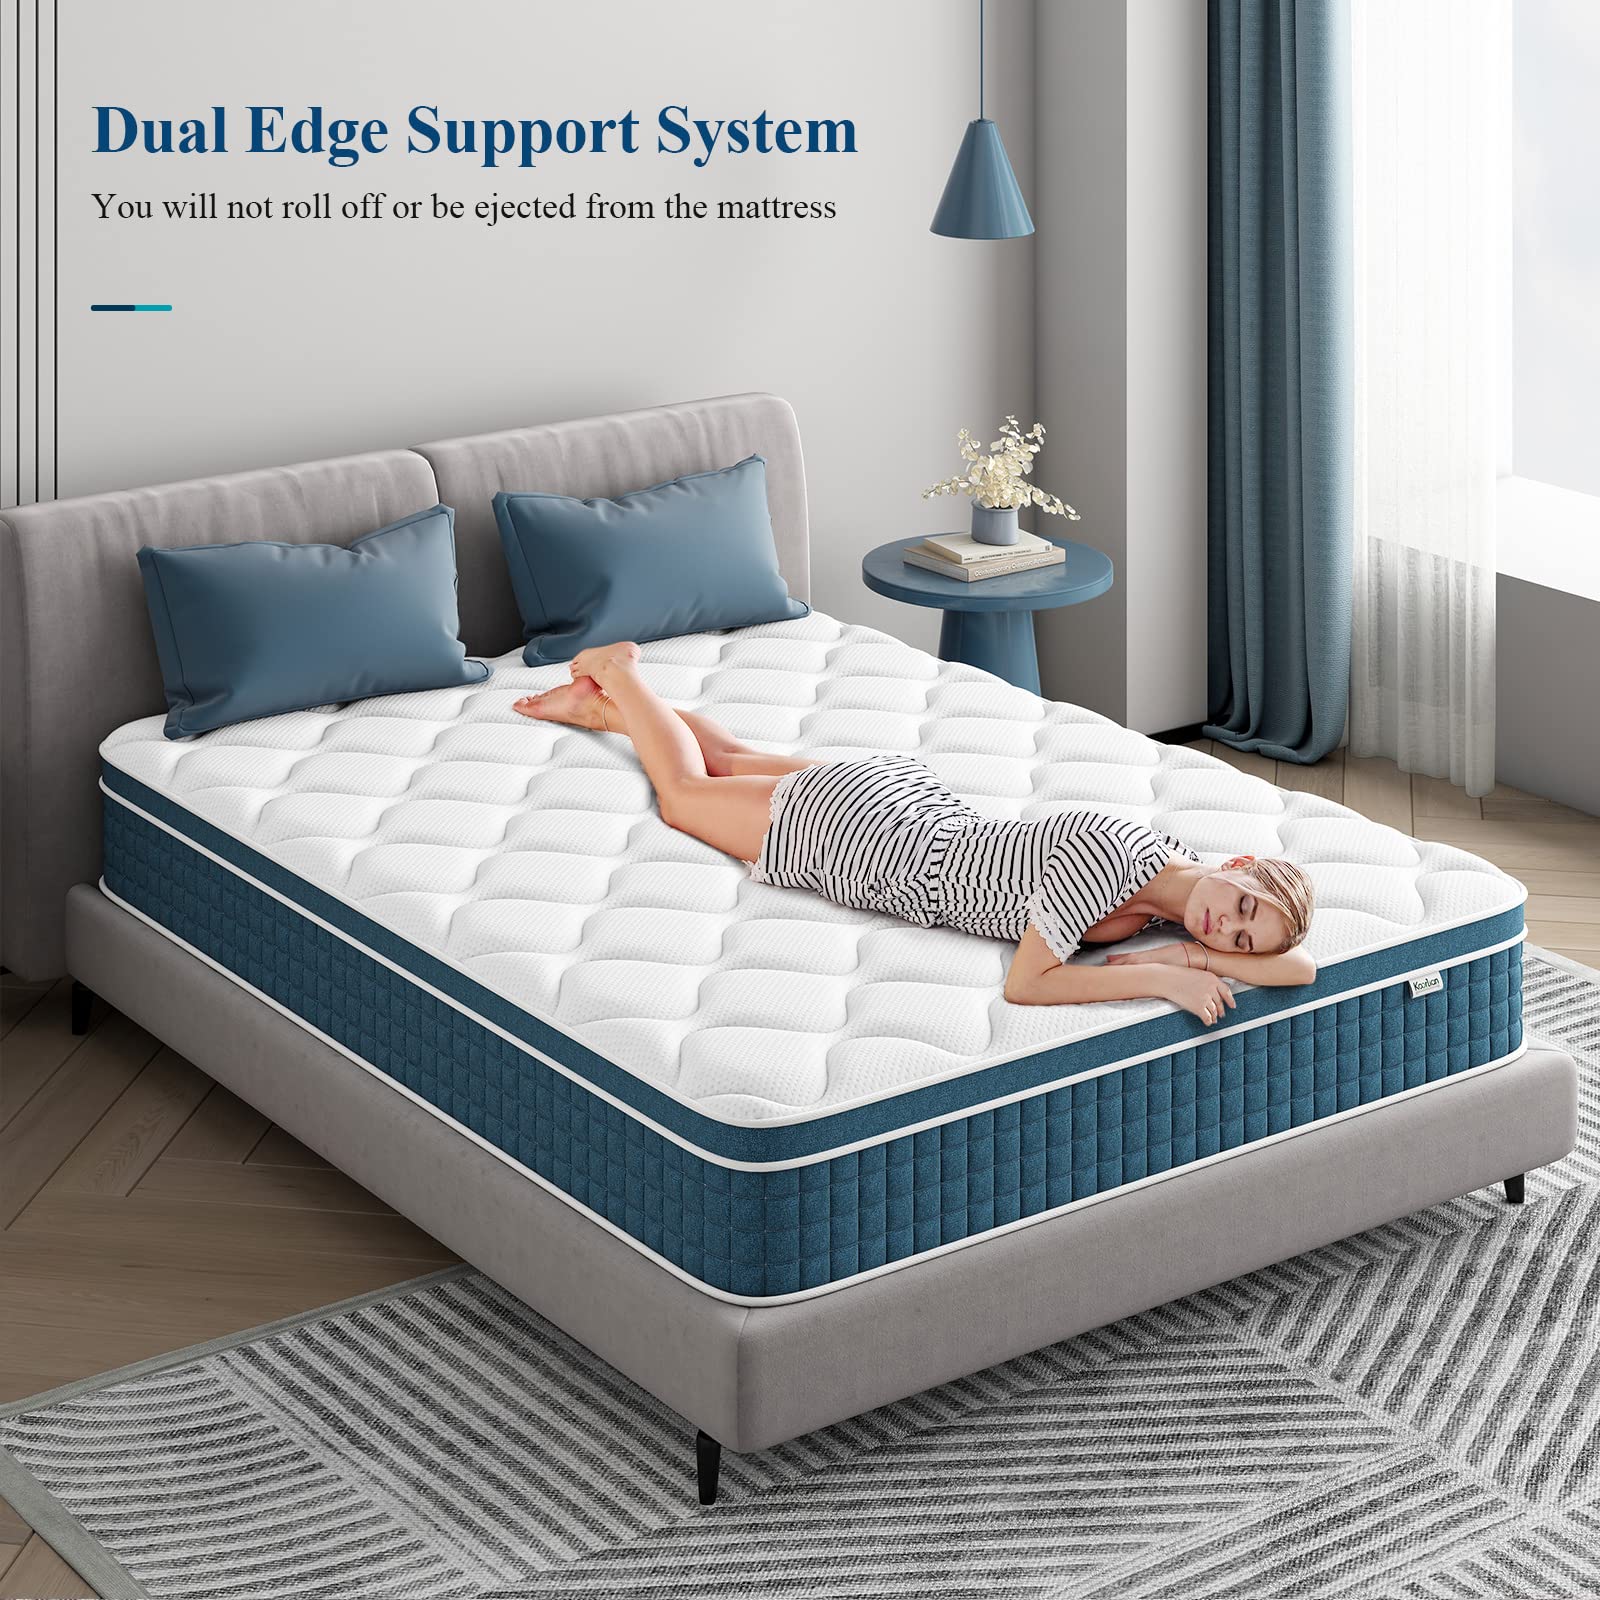 COOLCOMFORT - Medium-firm mattress with elastic foam and cooling